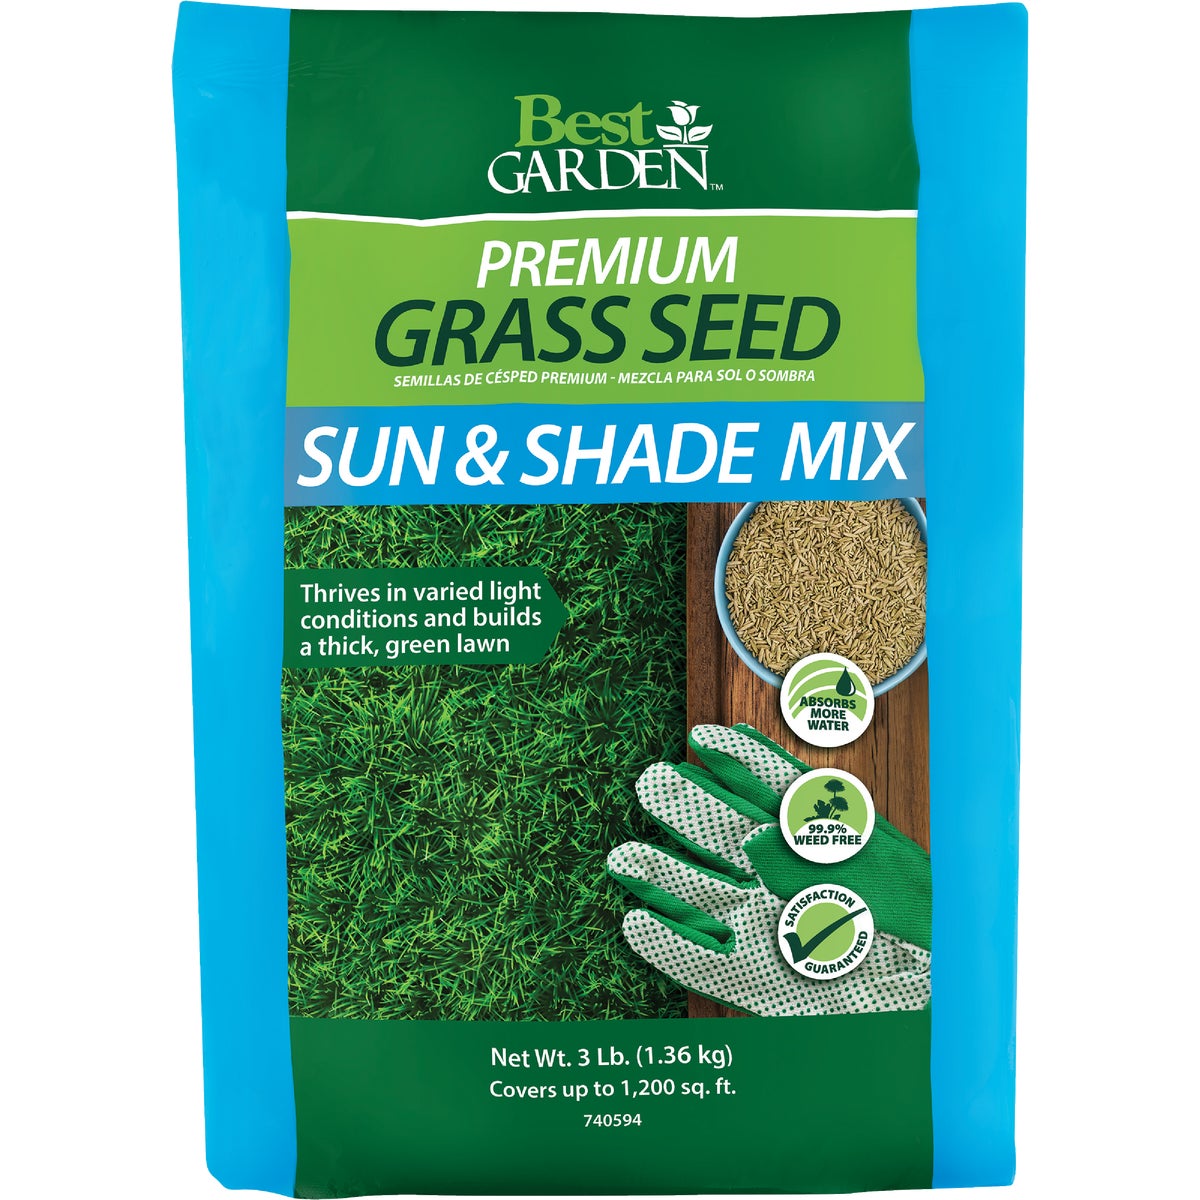 Item 740594, Versatile perennial grass seed mixture for areas with moderate shade to 